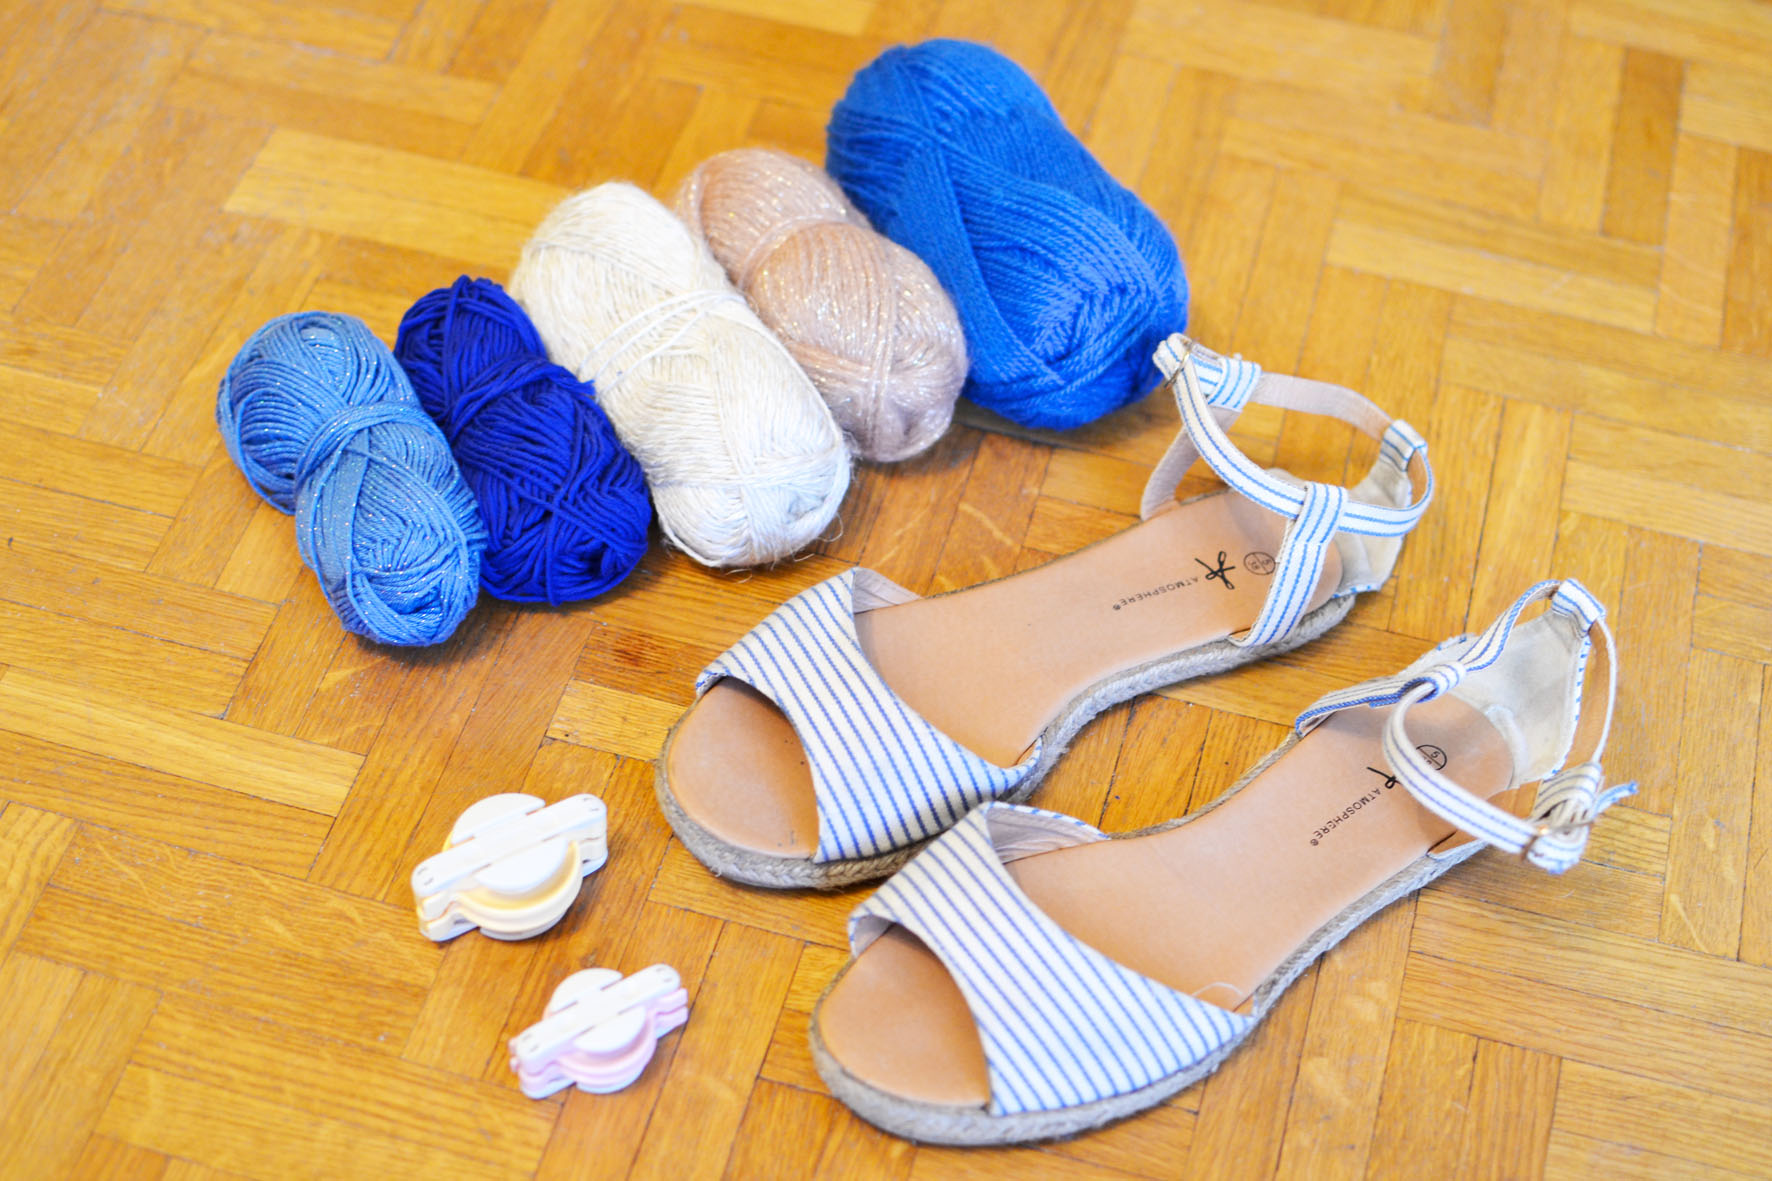 chaussures a pompons (10)